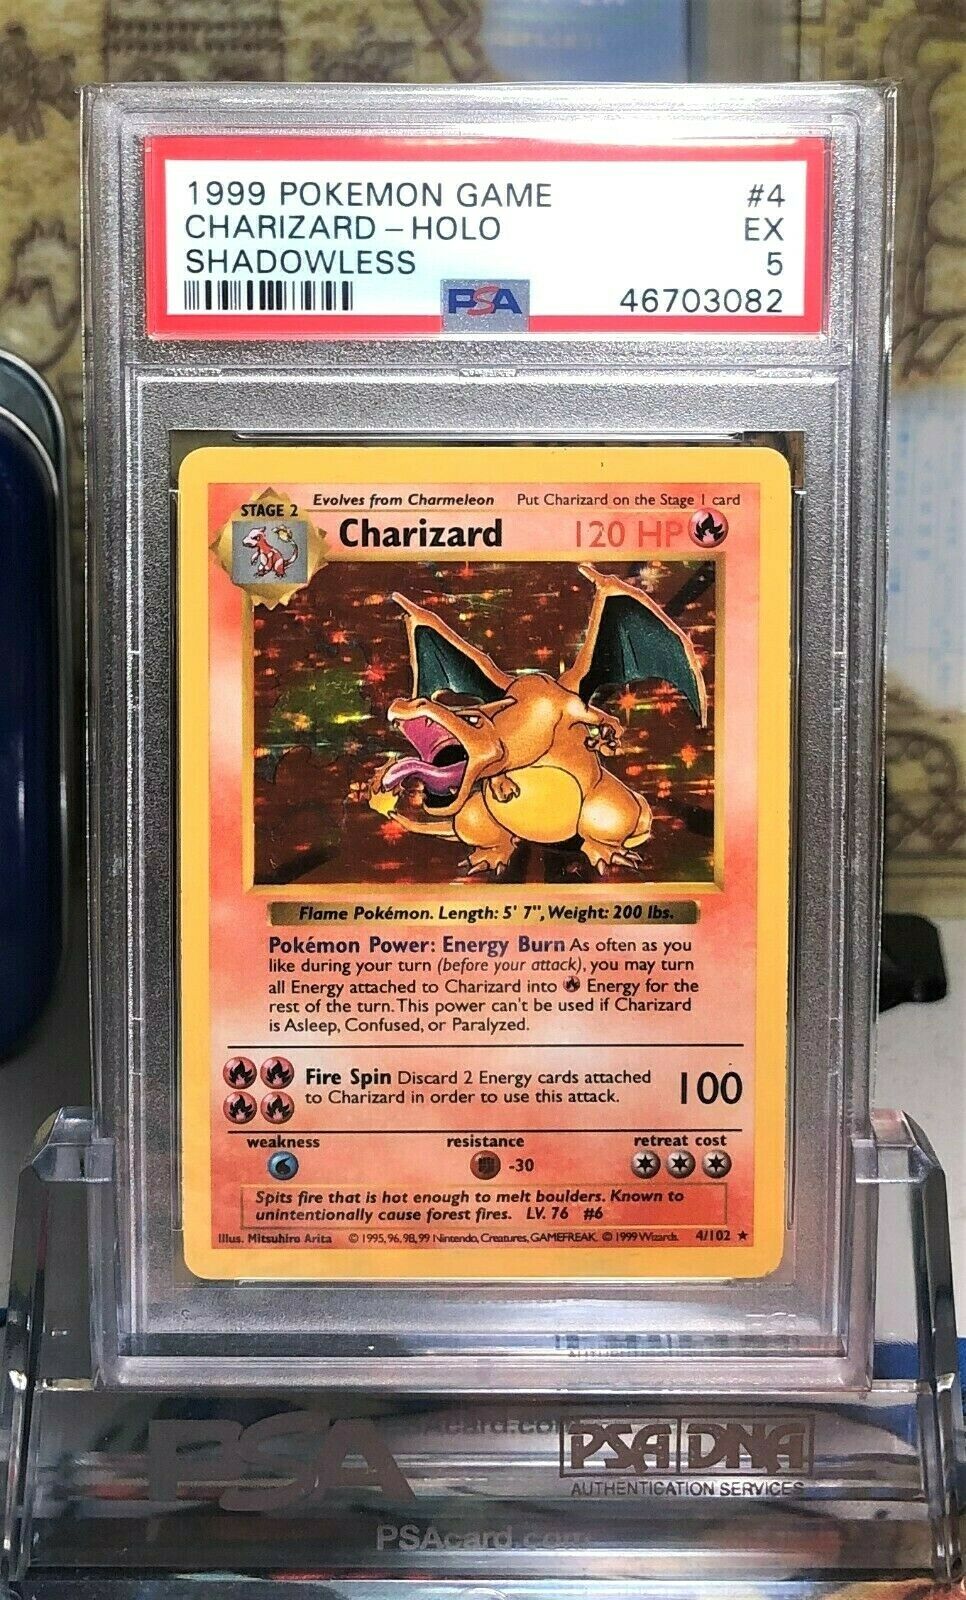 Pokemon PSA 5 EXCELLENT Shadowless Charizard 4102 Holo Rare Unlimited Base 1999